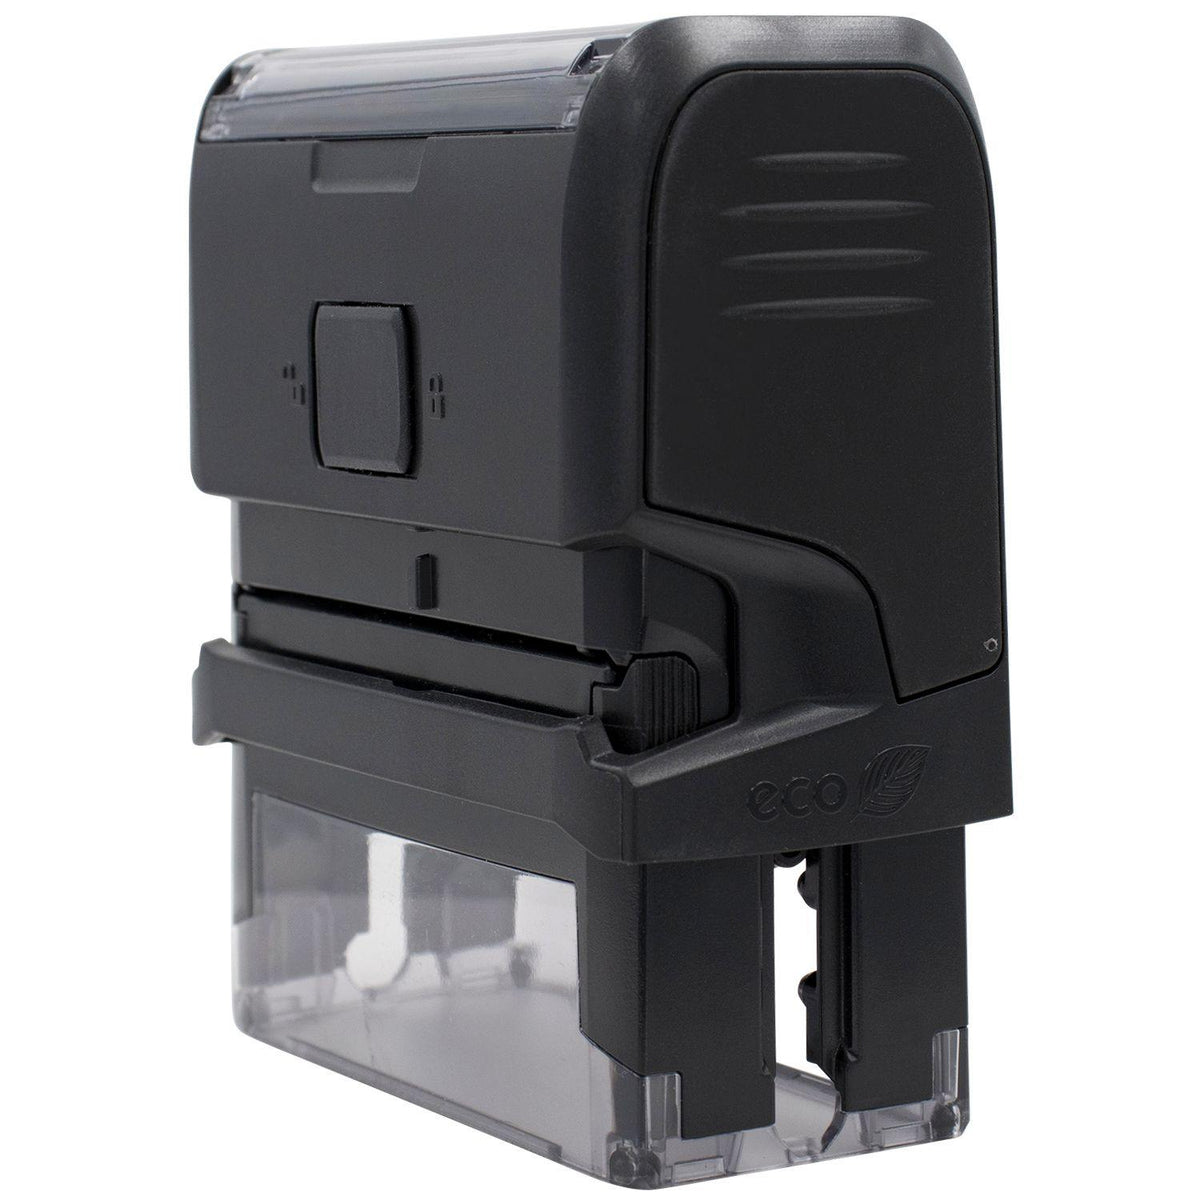 Side View of Large Self-Inking COD Outline Stamp at an Angle